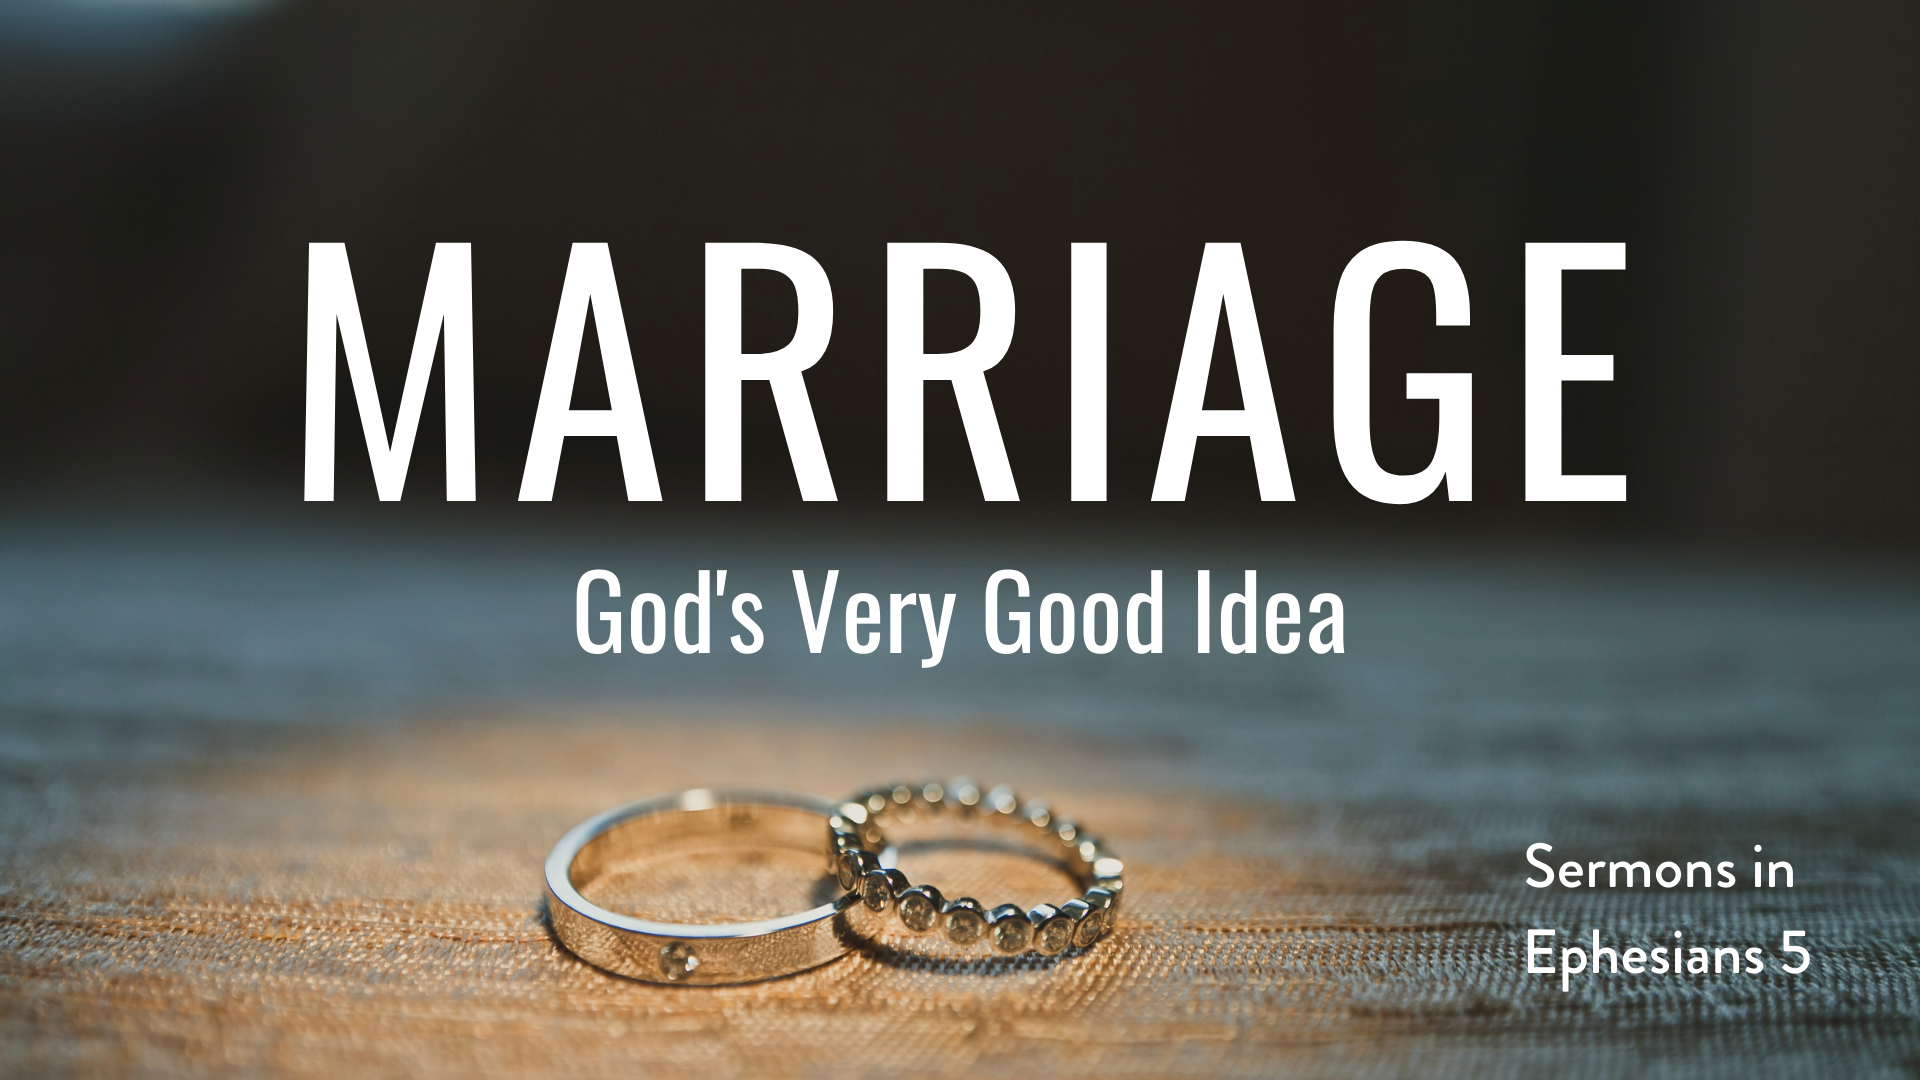 Biblical Marriage: Holiness